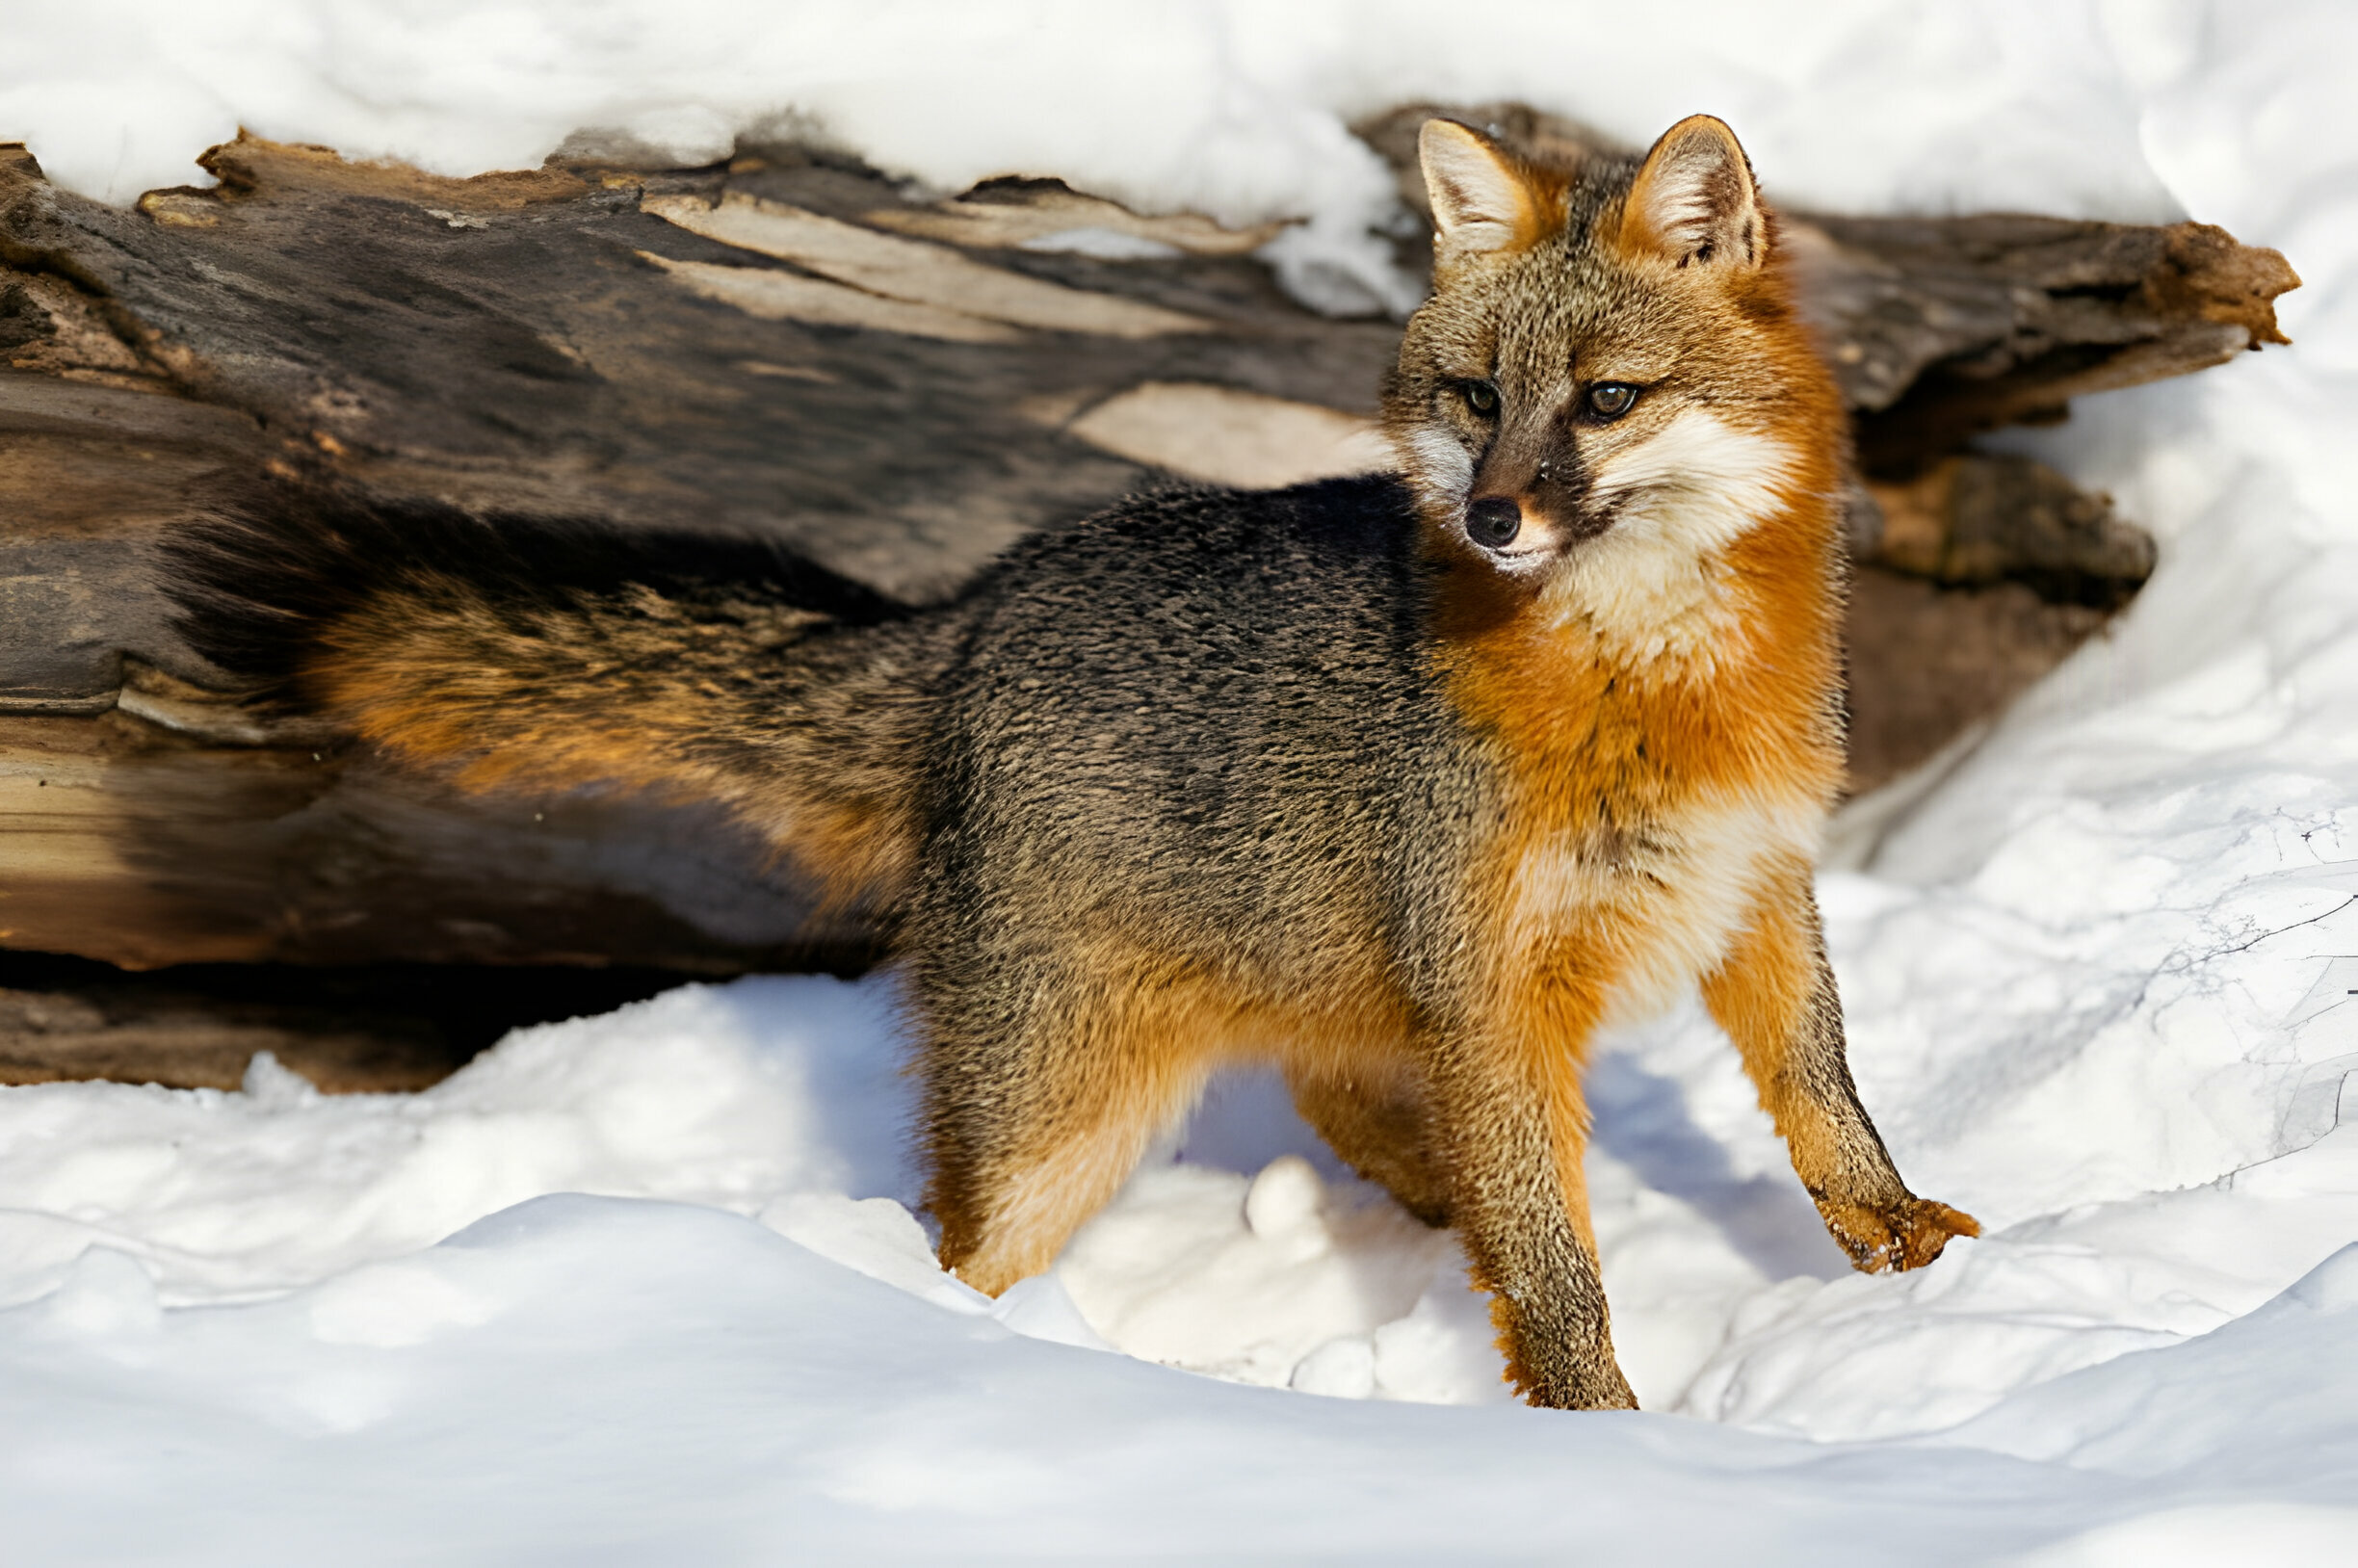 Red fox with a bushy tail against a snowy backdrop.